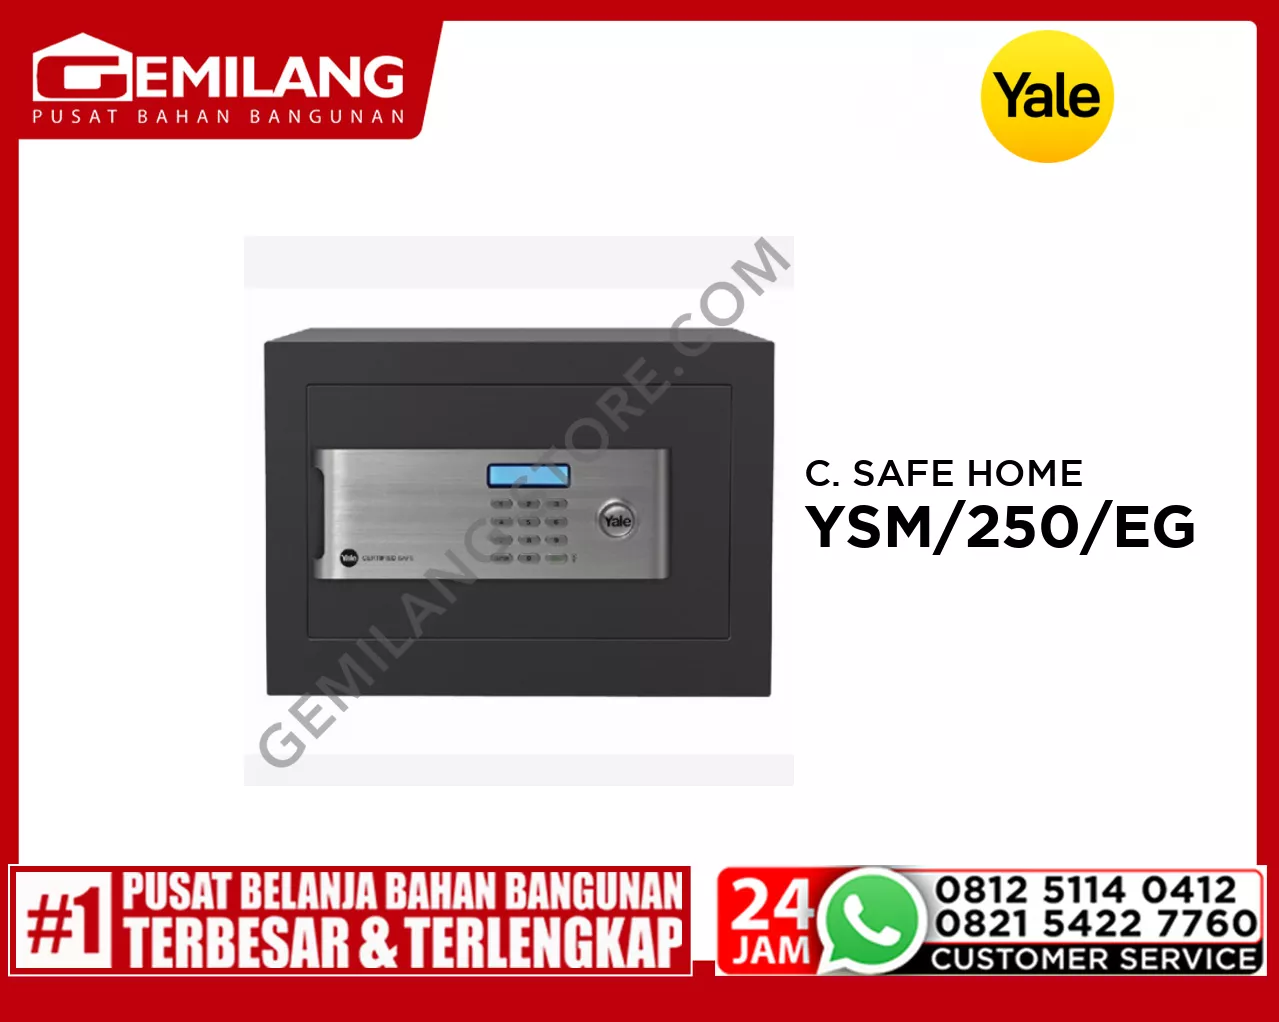 YALE CERTIFIED SAFE HOME GRAY YSM/250/EG/1